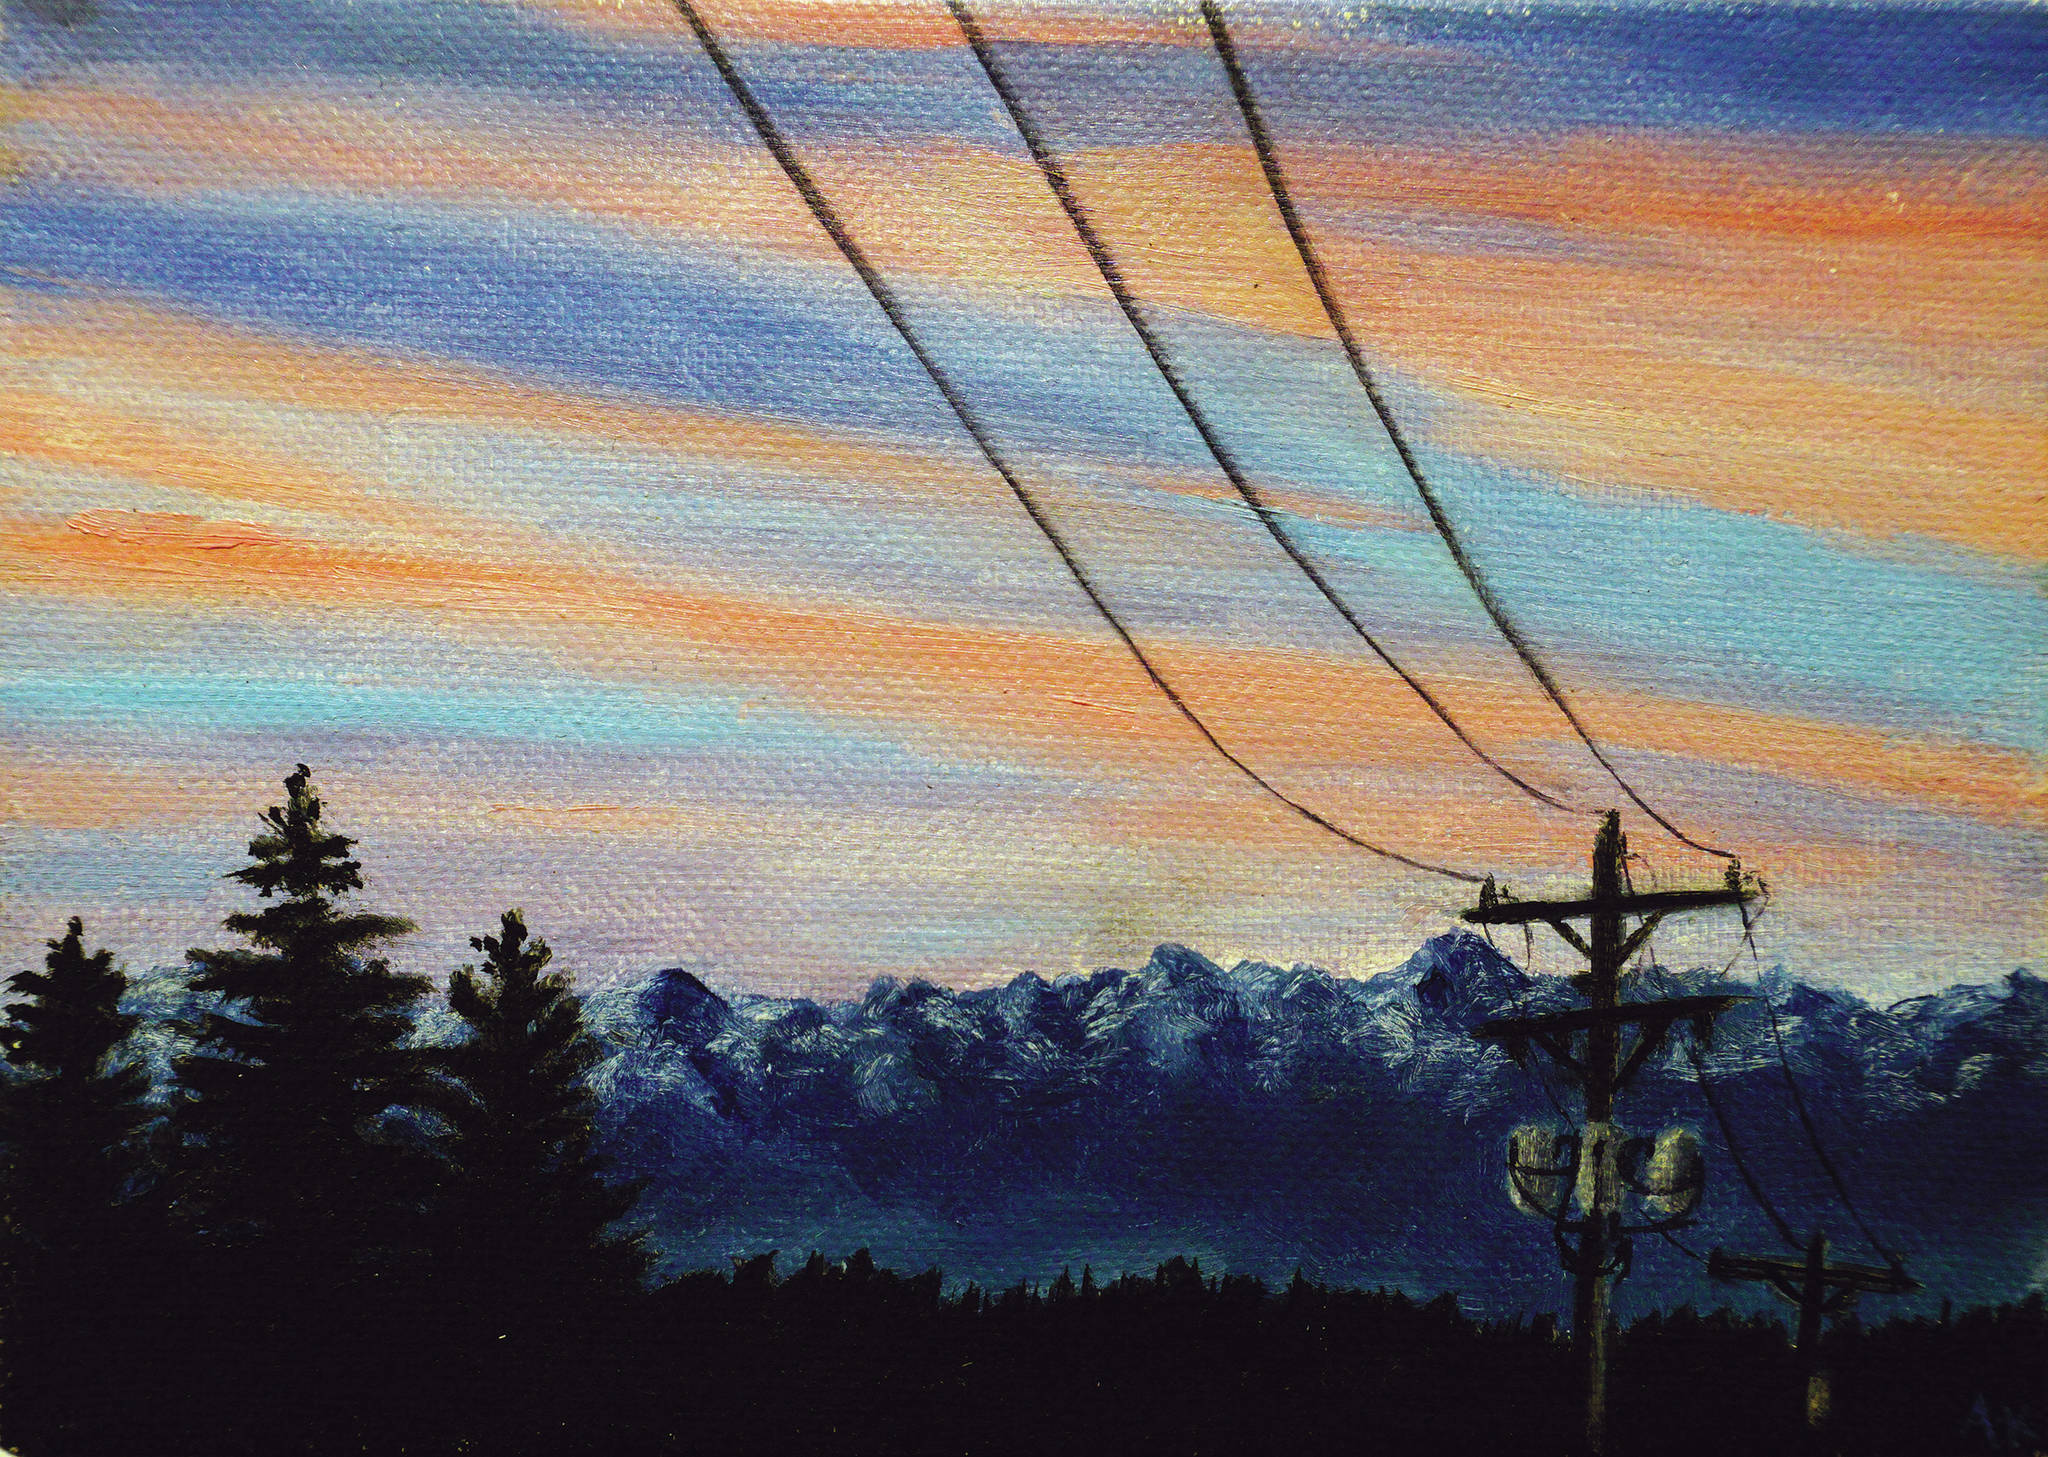 Amanda Kelly’s “Bunnell Street Sunrise” is one of the pieces in “Fun with 5x7” show at the Homer Council on the Arts, on display through Dec. 17, 2020, at the gallery in Homer, Alaska. (Photo by Michael Armstrong/Homer News)